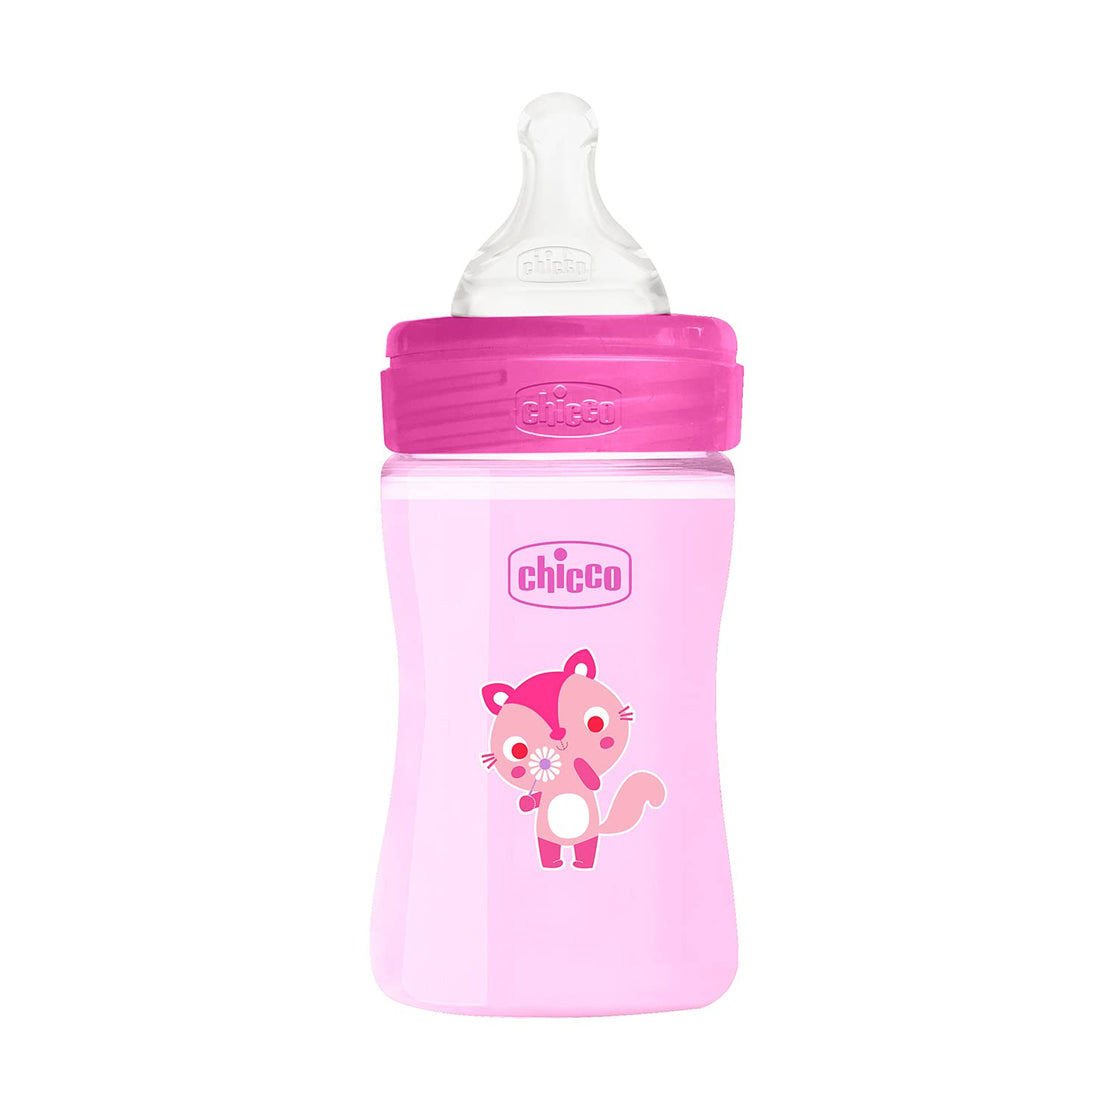 Chicco Well-Being Baby Coloured Feeding Bottle for Babies & Toddlers, 150ml, Pink